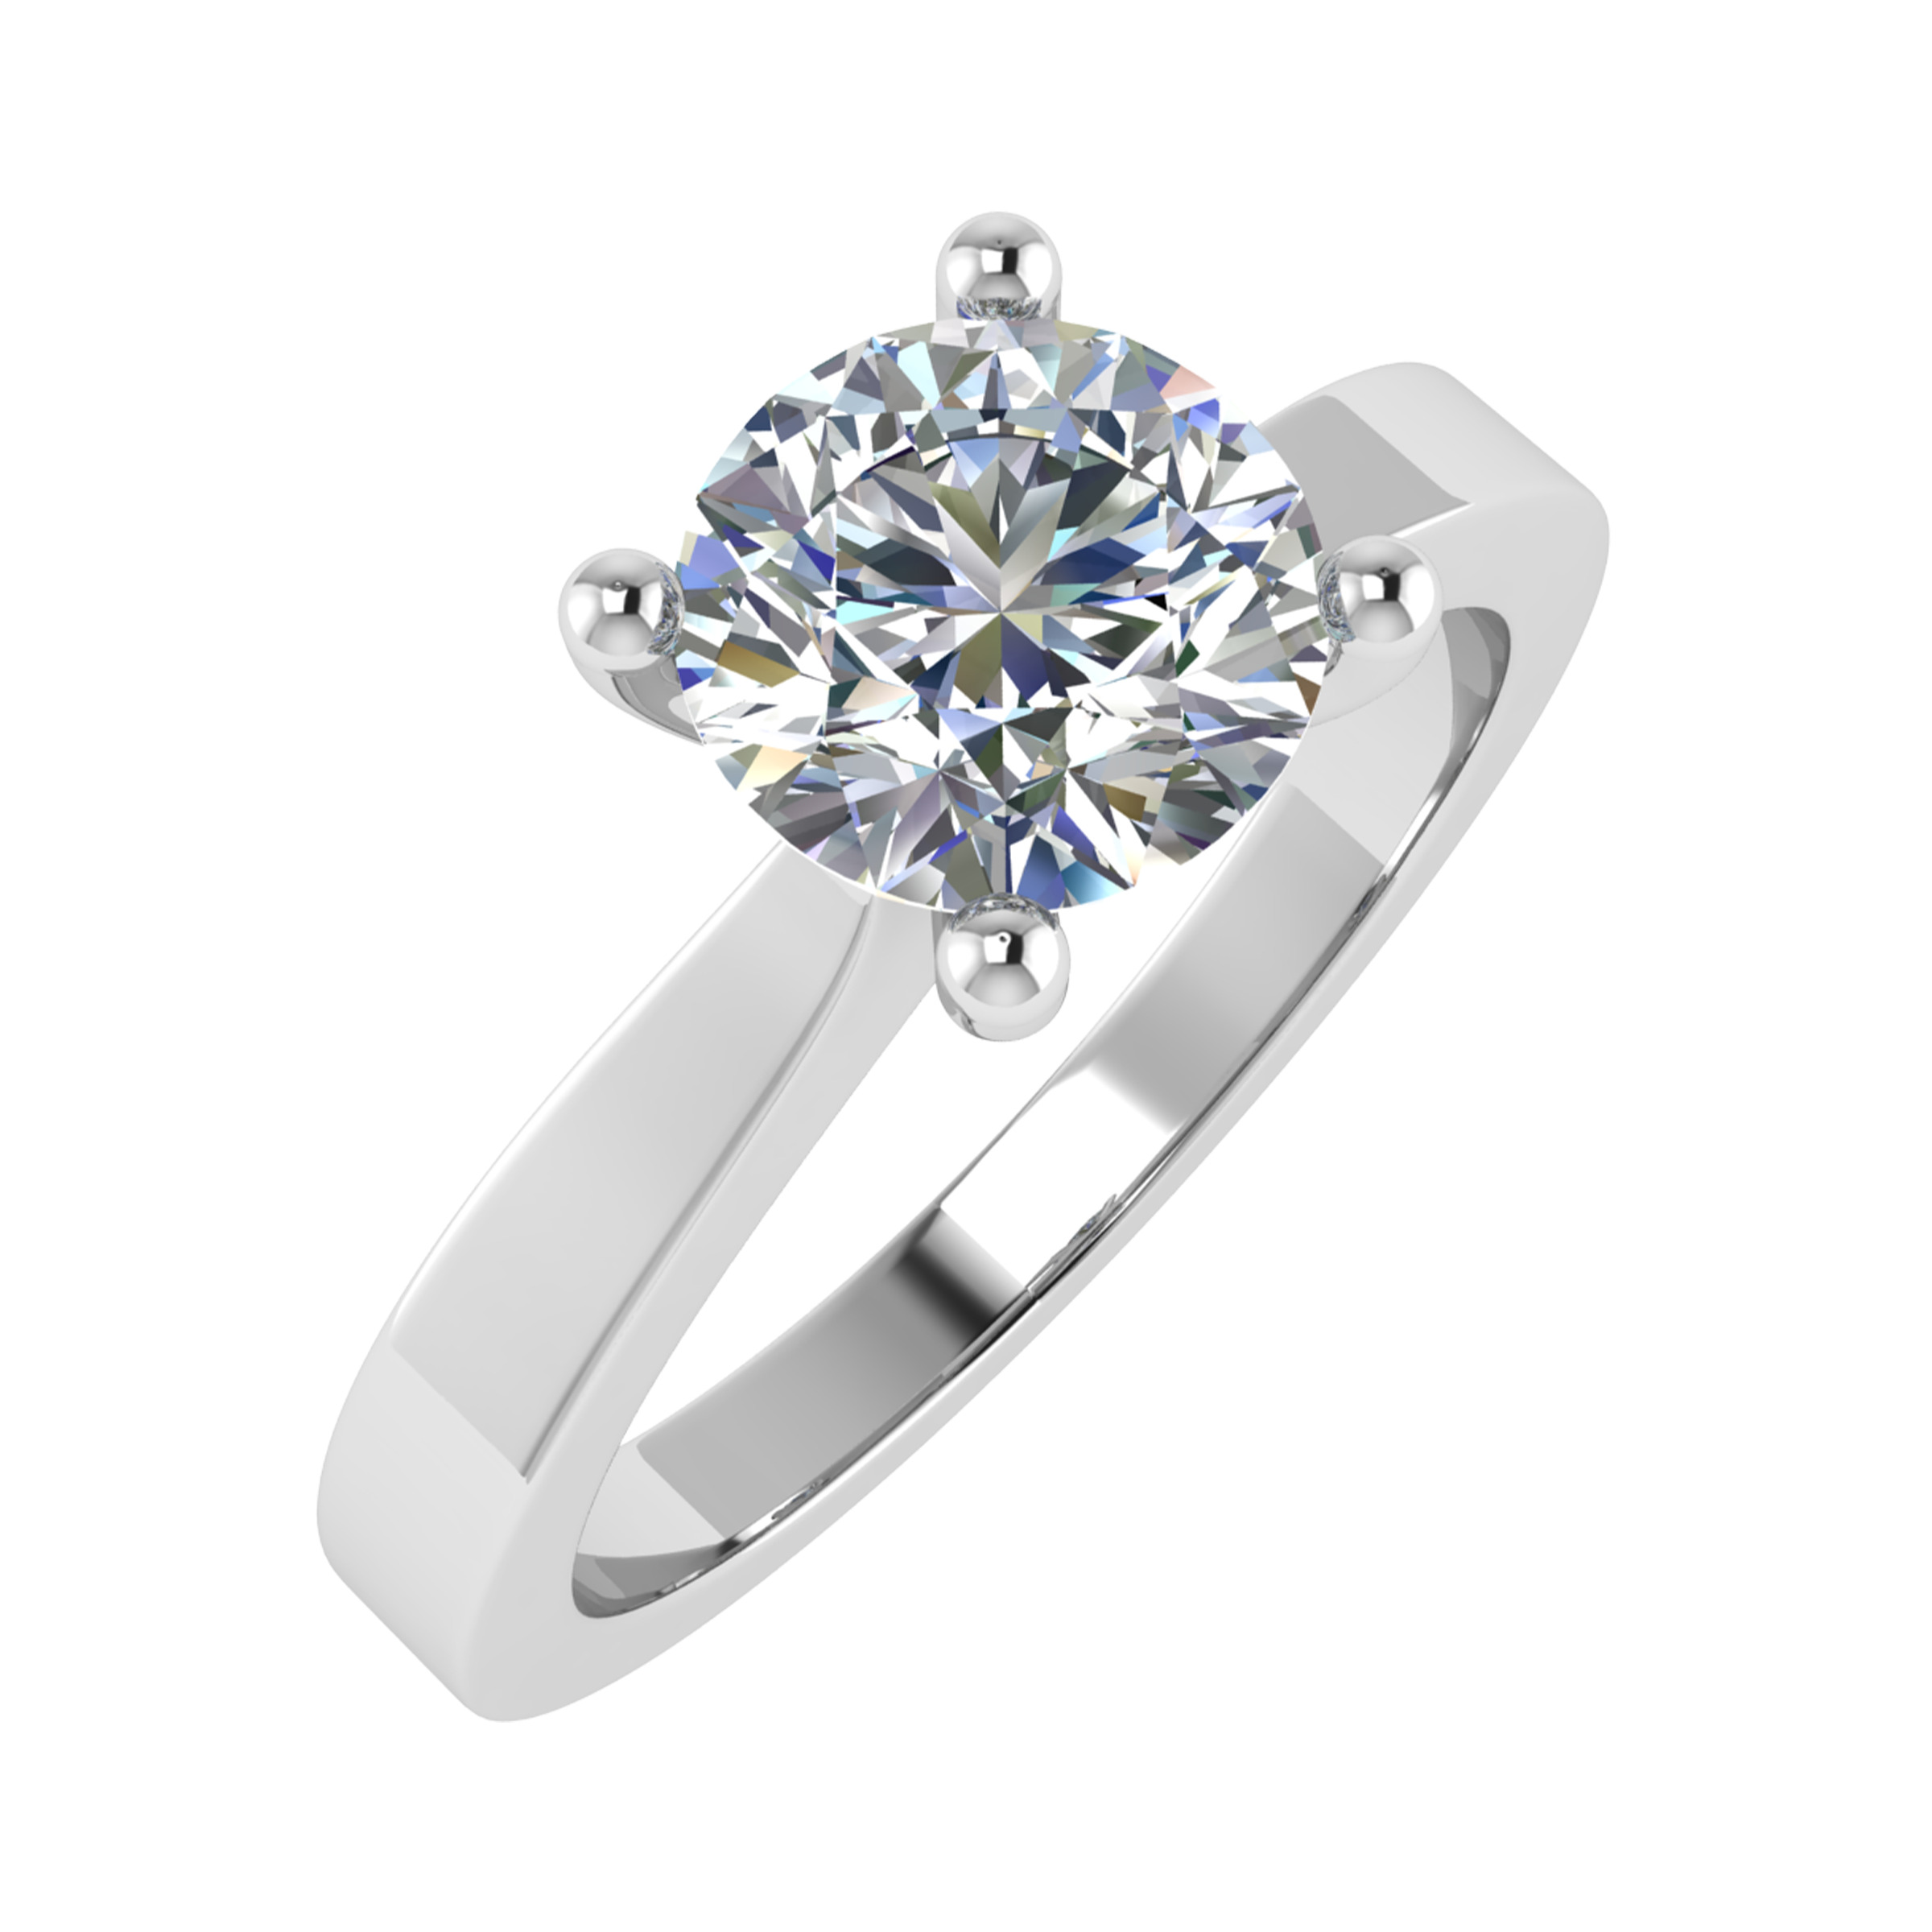 0.20-3.00 Carat Round Cut Diamond 4 Prong Solitaire Engagement Ring 